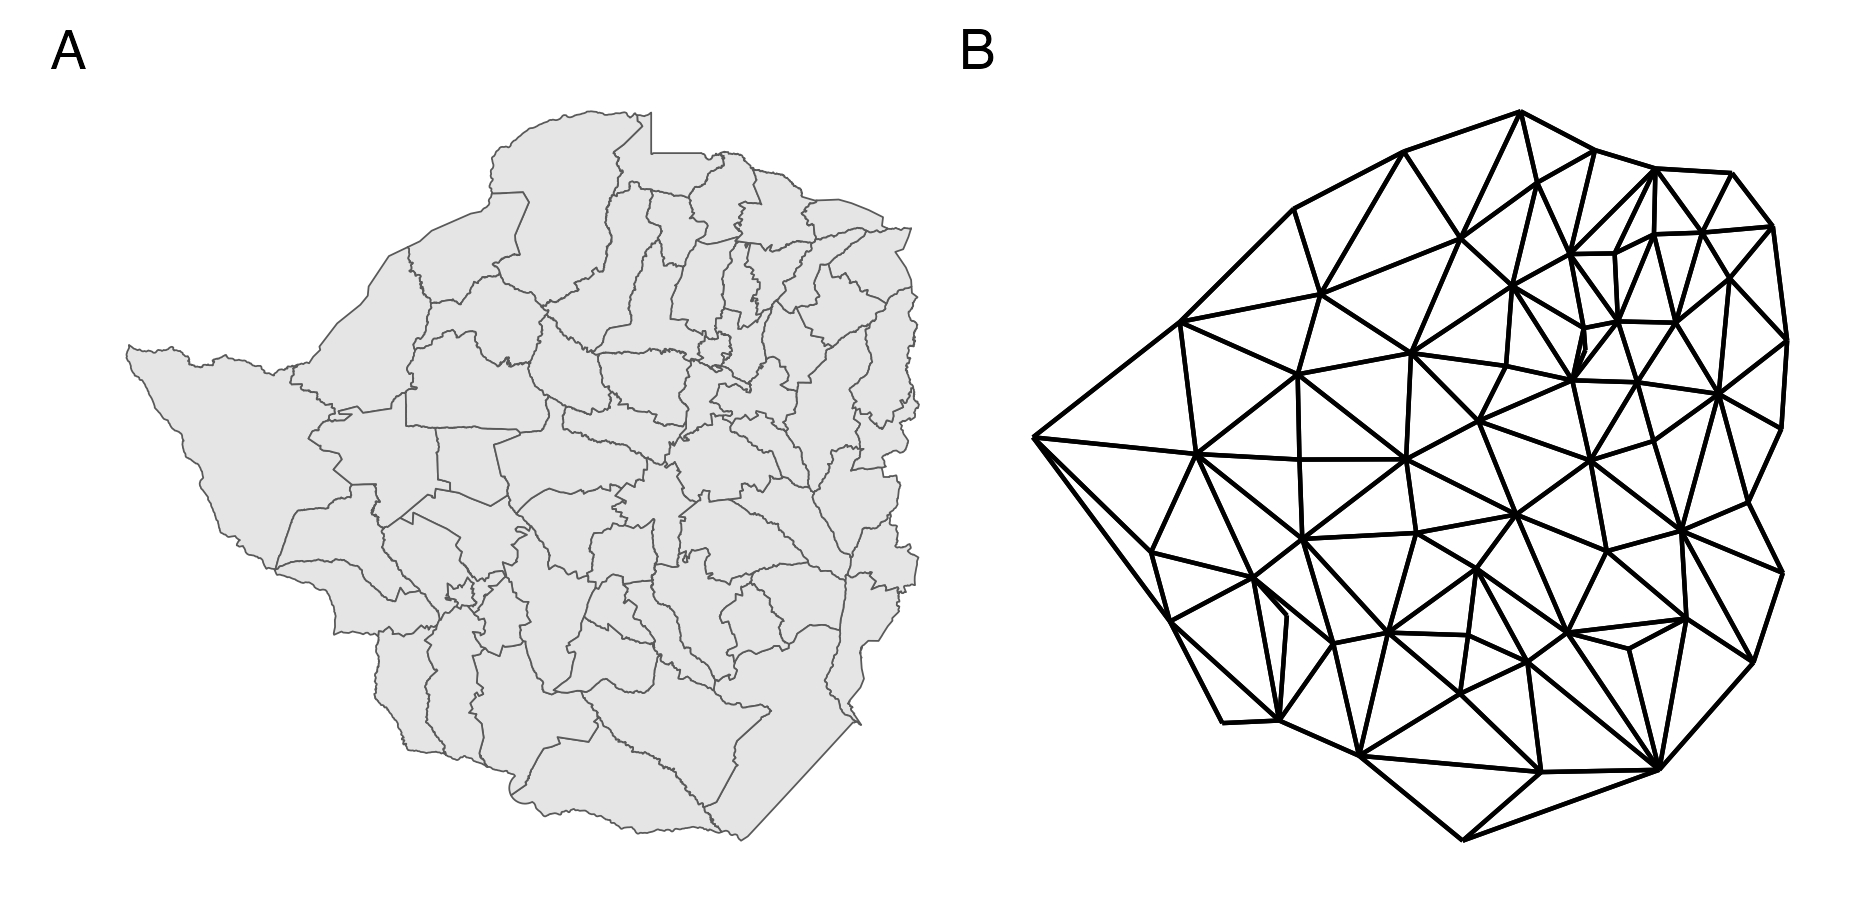 Panel A shows the districts of Zimbabwe. Panel B shows the corresponding adjacency graph \(\mathcal{G}\) with vertices positioned at the centre of the area they correspond to, and edges between adjacent areas.